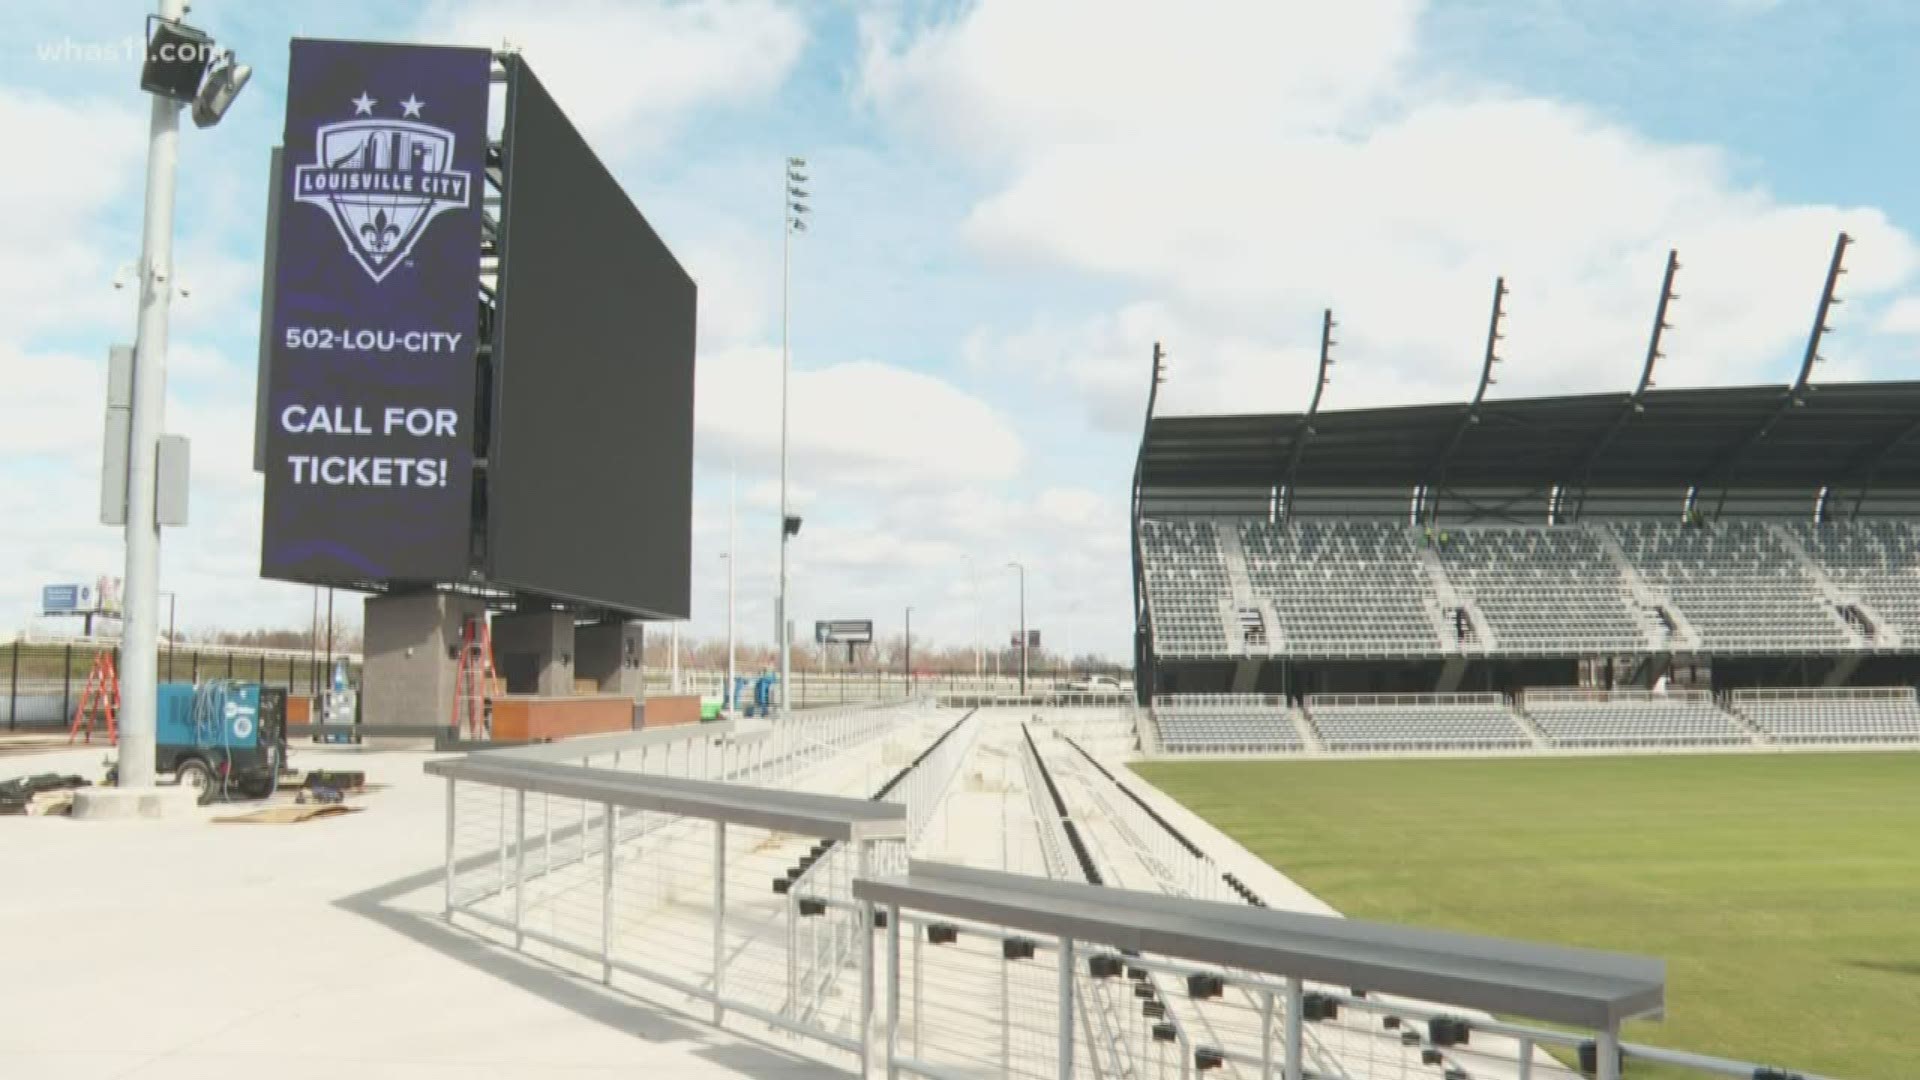 That's when Louisville City FC will host its home opener this season the first time the club plays in that brand new stadium in Butchertown.